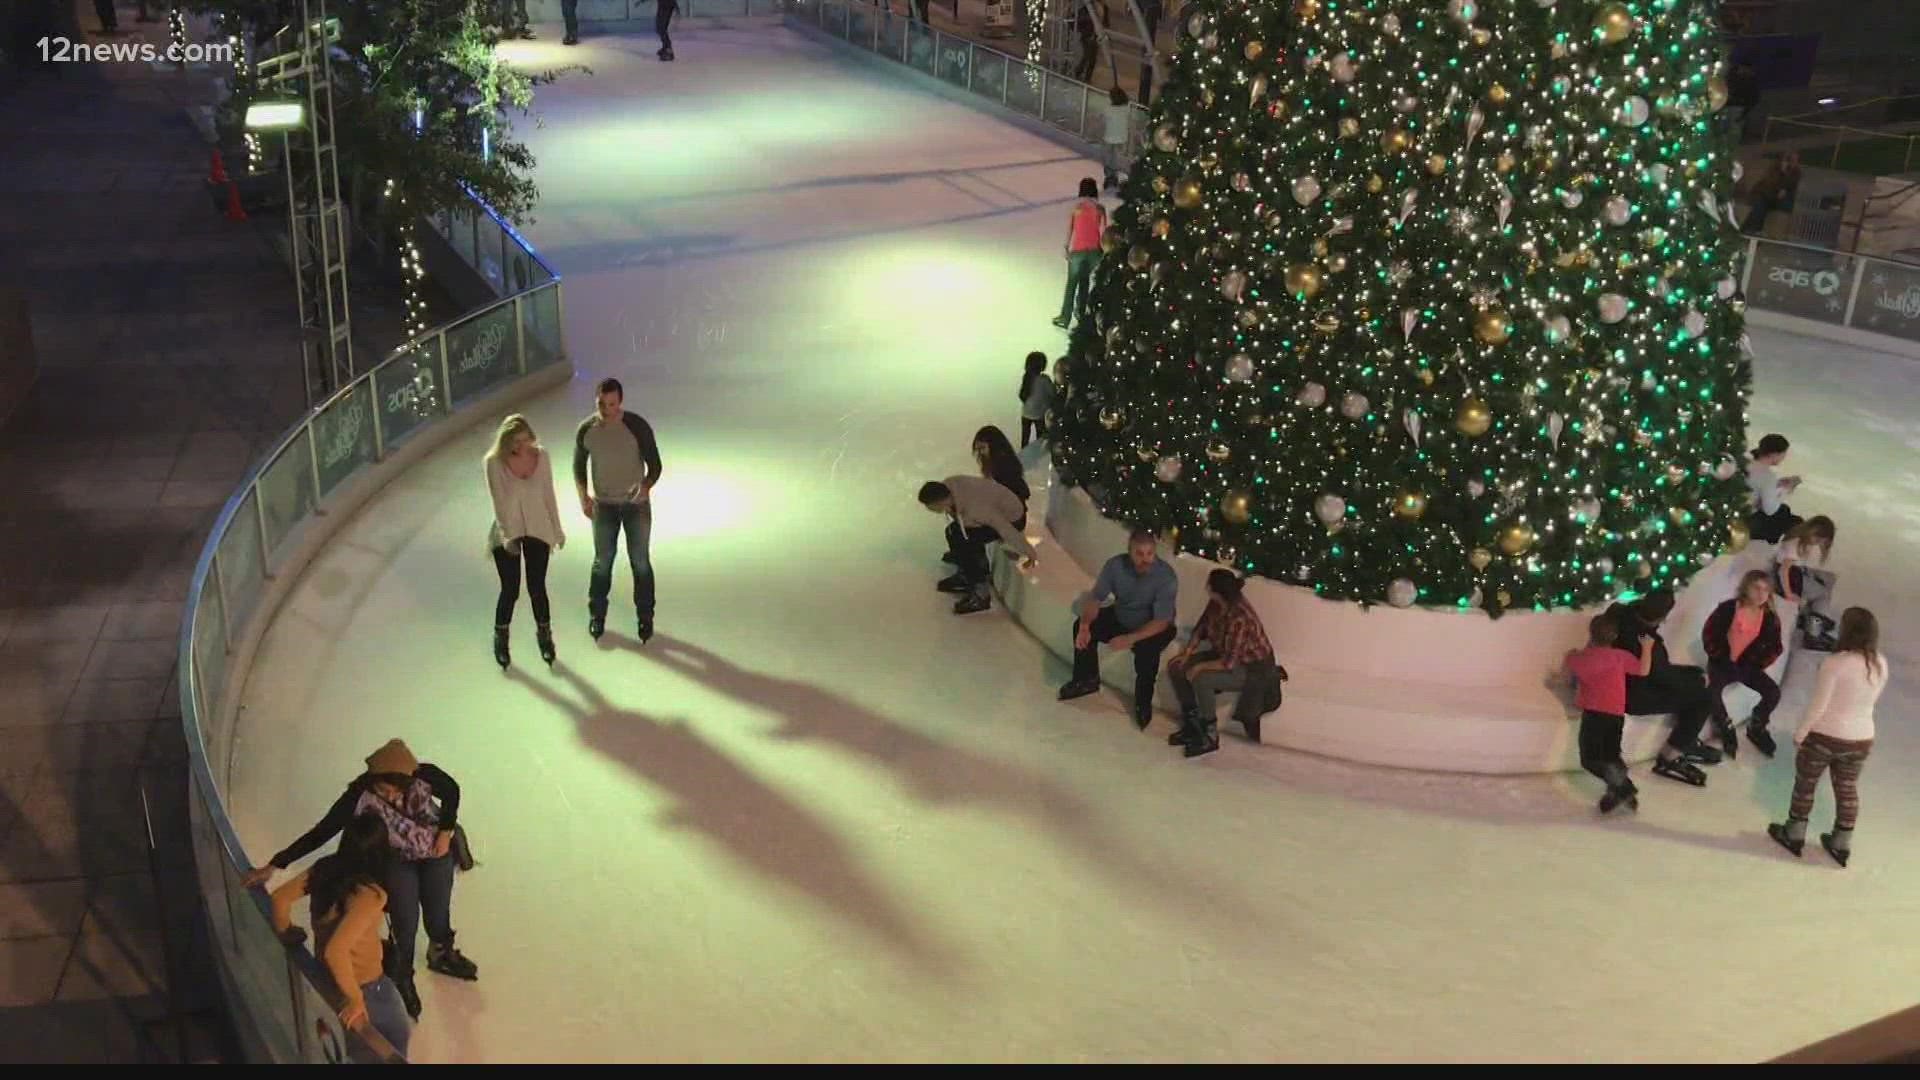 The desert's famous ice rink is $18 per skier and will be open throughout the holiday season.